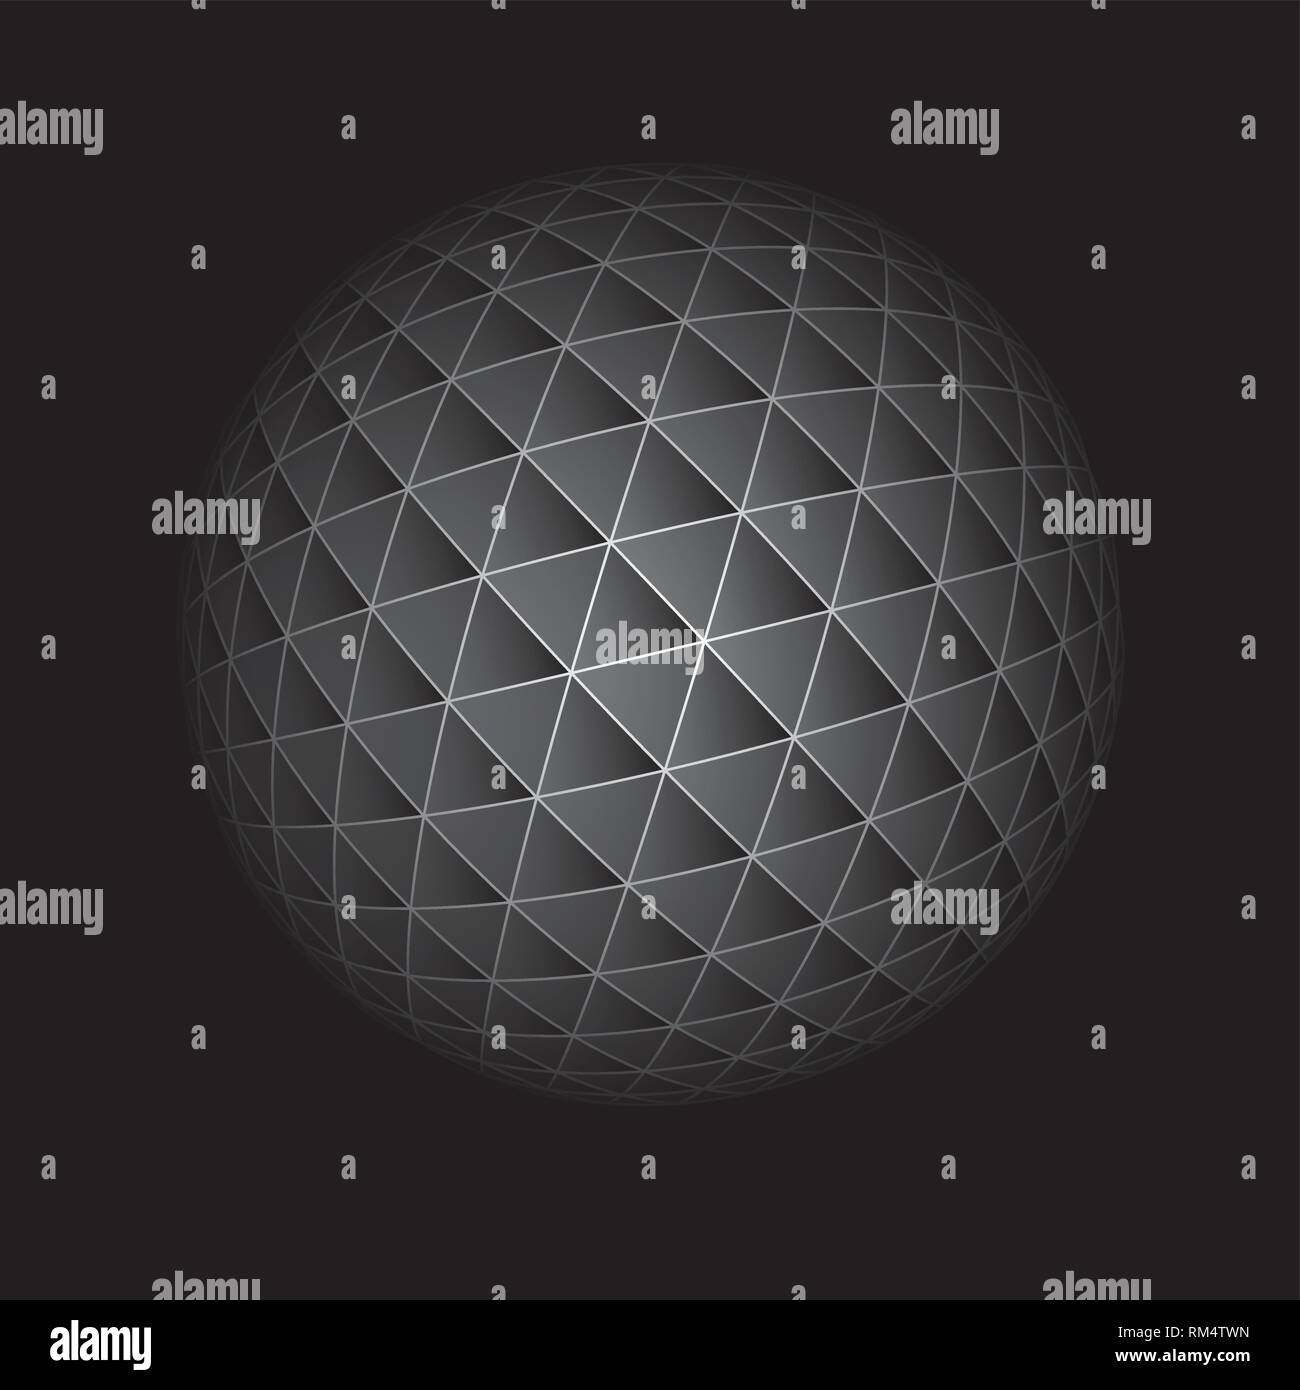 Abstract geometric sphere from triangular faces on dark background, for graphic design - Vector Stock Vector